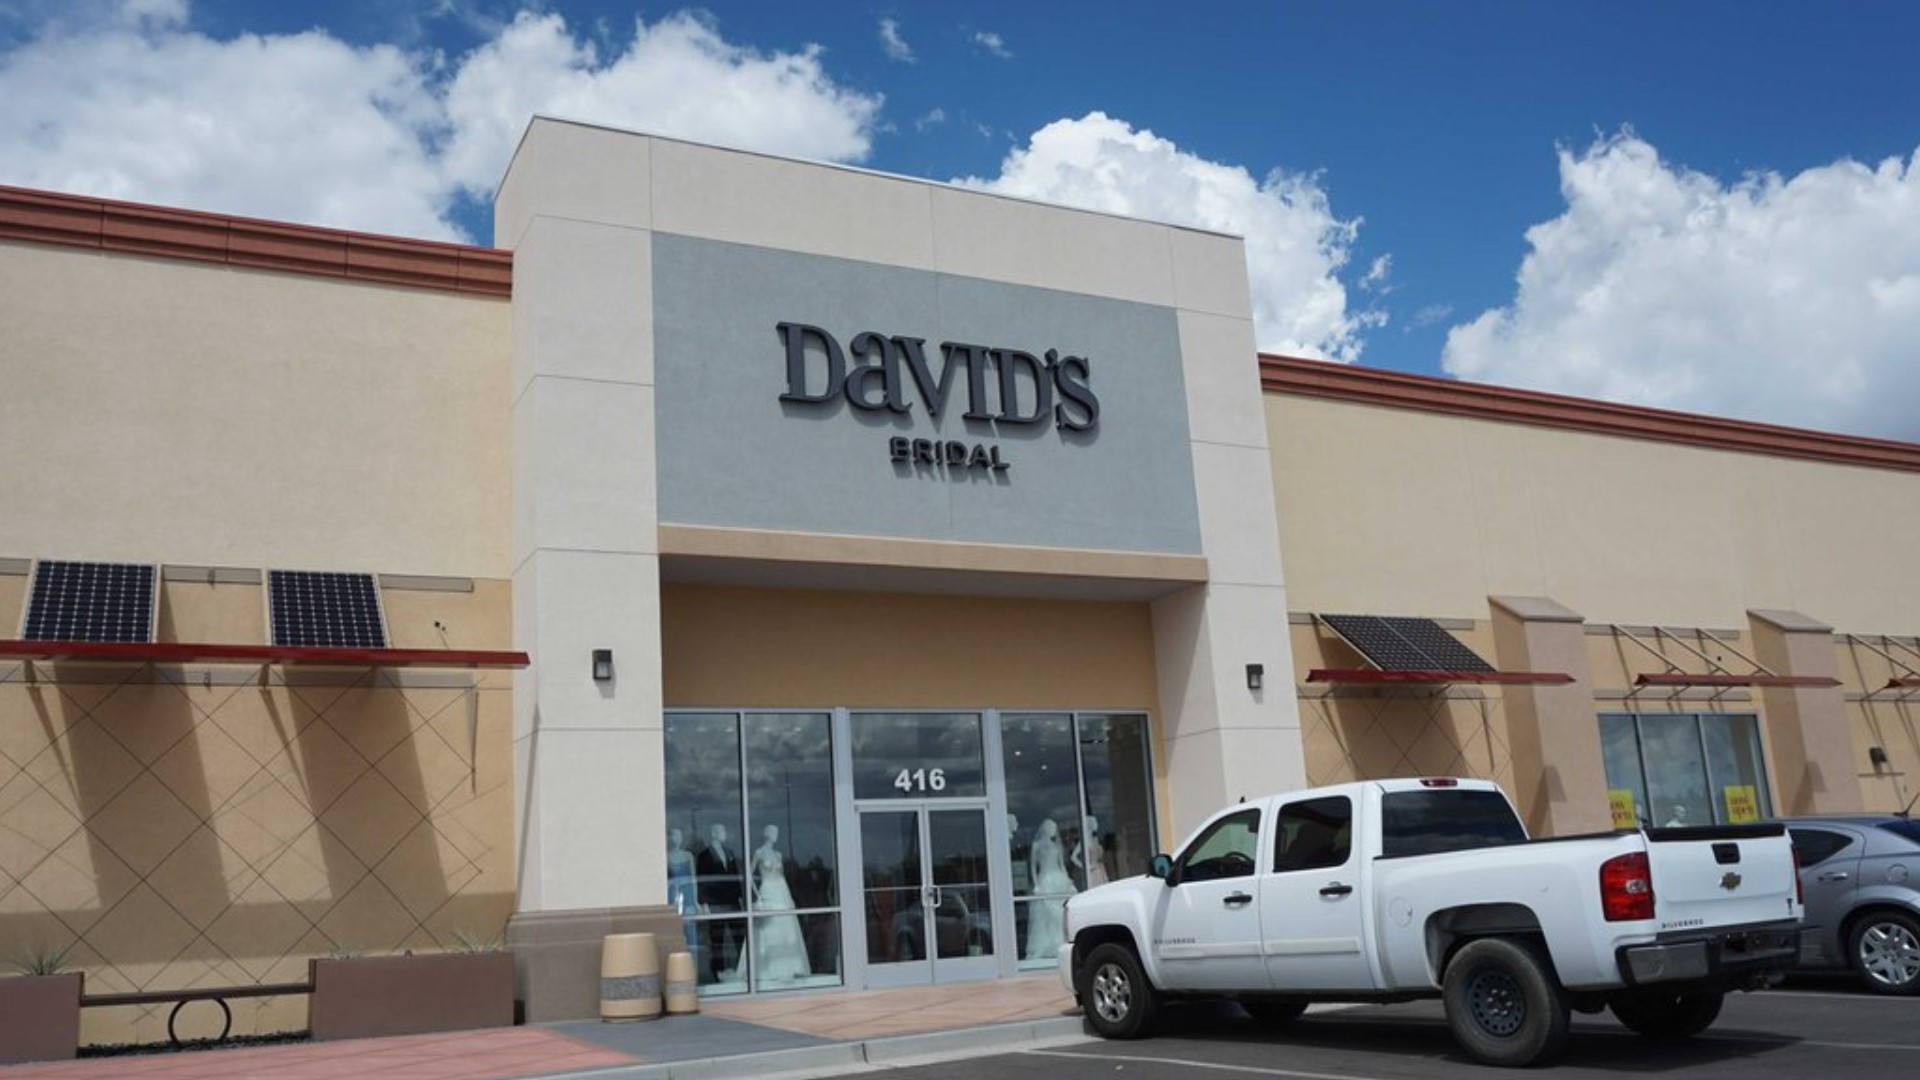 David's Bridal plans to lay off off more than 9,000 employees and potentially close locations as it explores a possible sale.